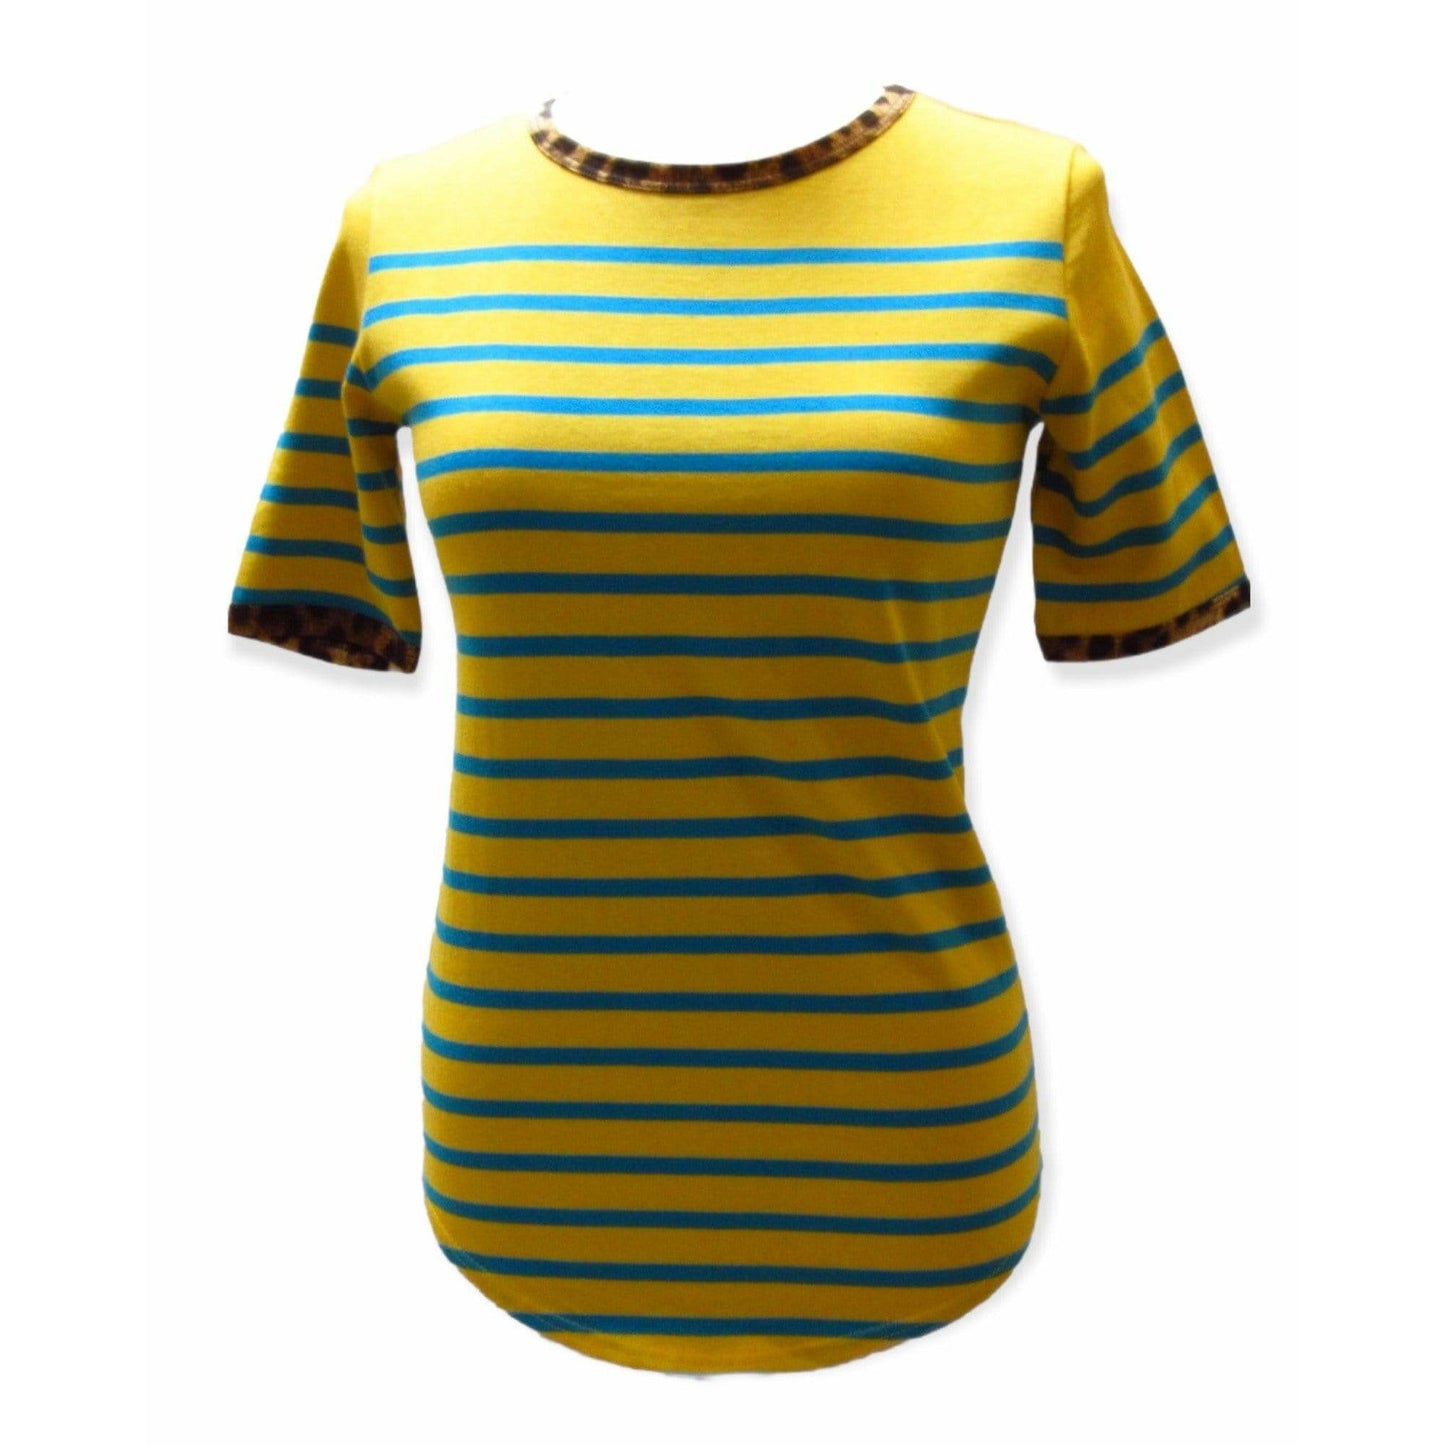 Shirts & Tops jean-paul-gaultier-yellow-striped-tee Saddle Brown